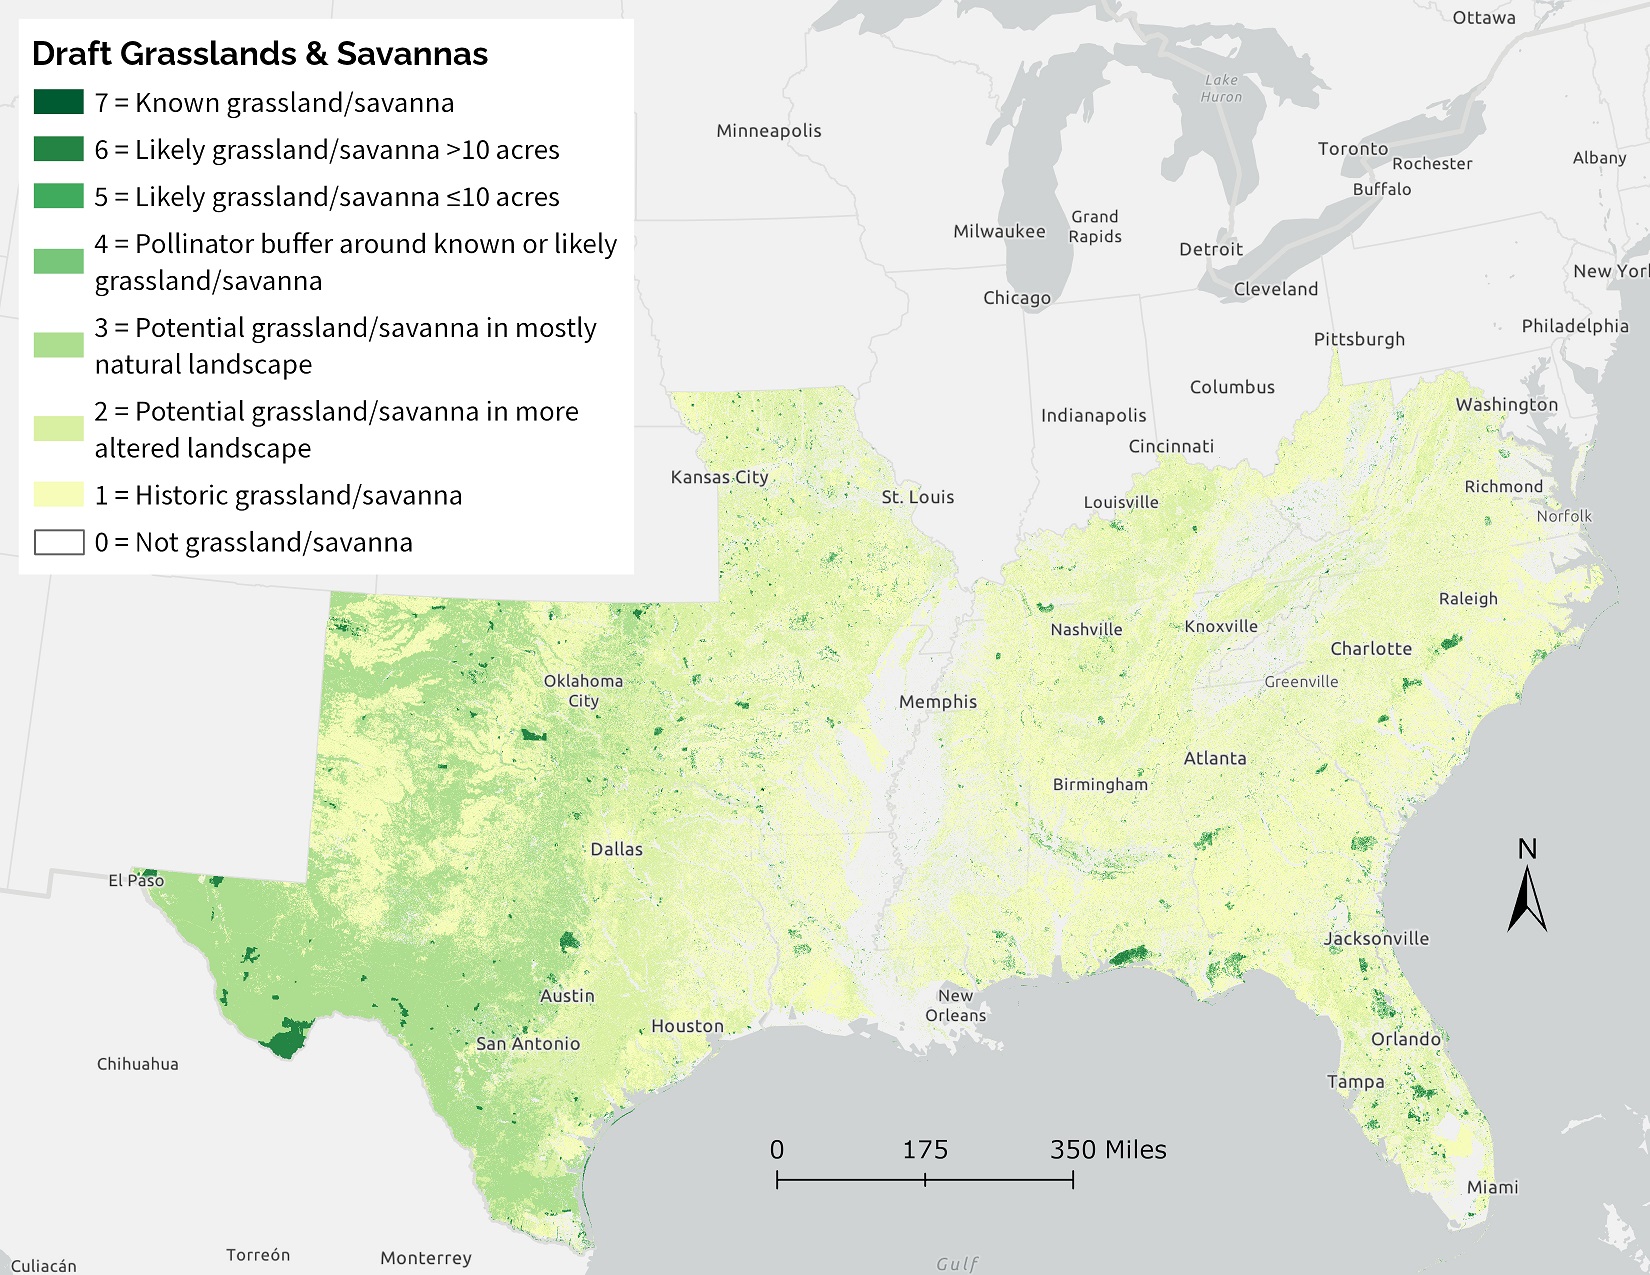 Map of the draft grasslands and savannas indicator showing known, potential, and historic grasslands/savannas and surrounding pollinator buffers in shades of green on a grey basemap.